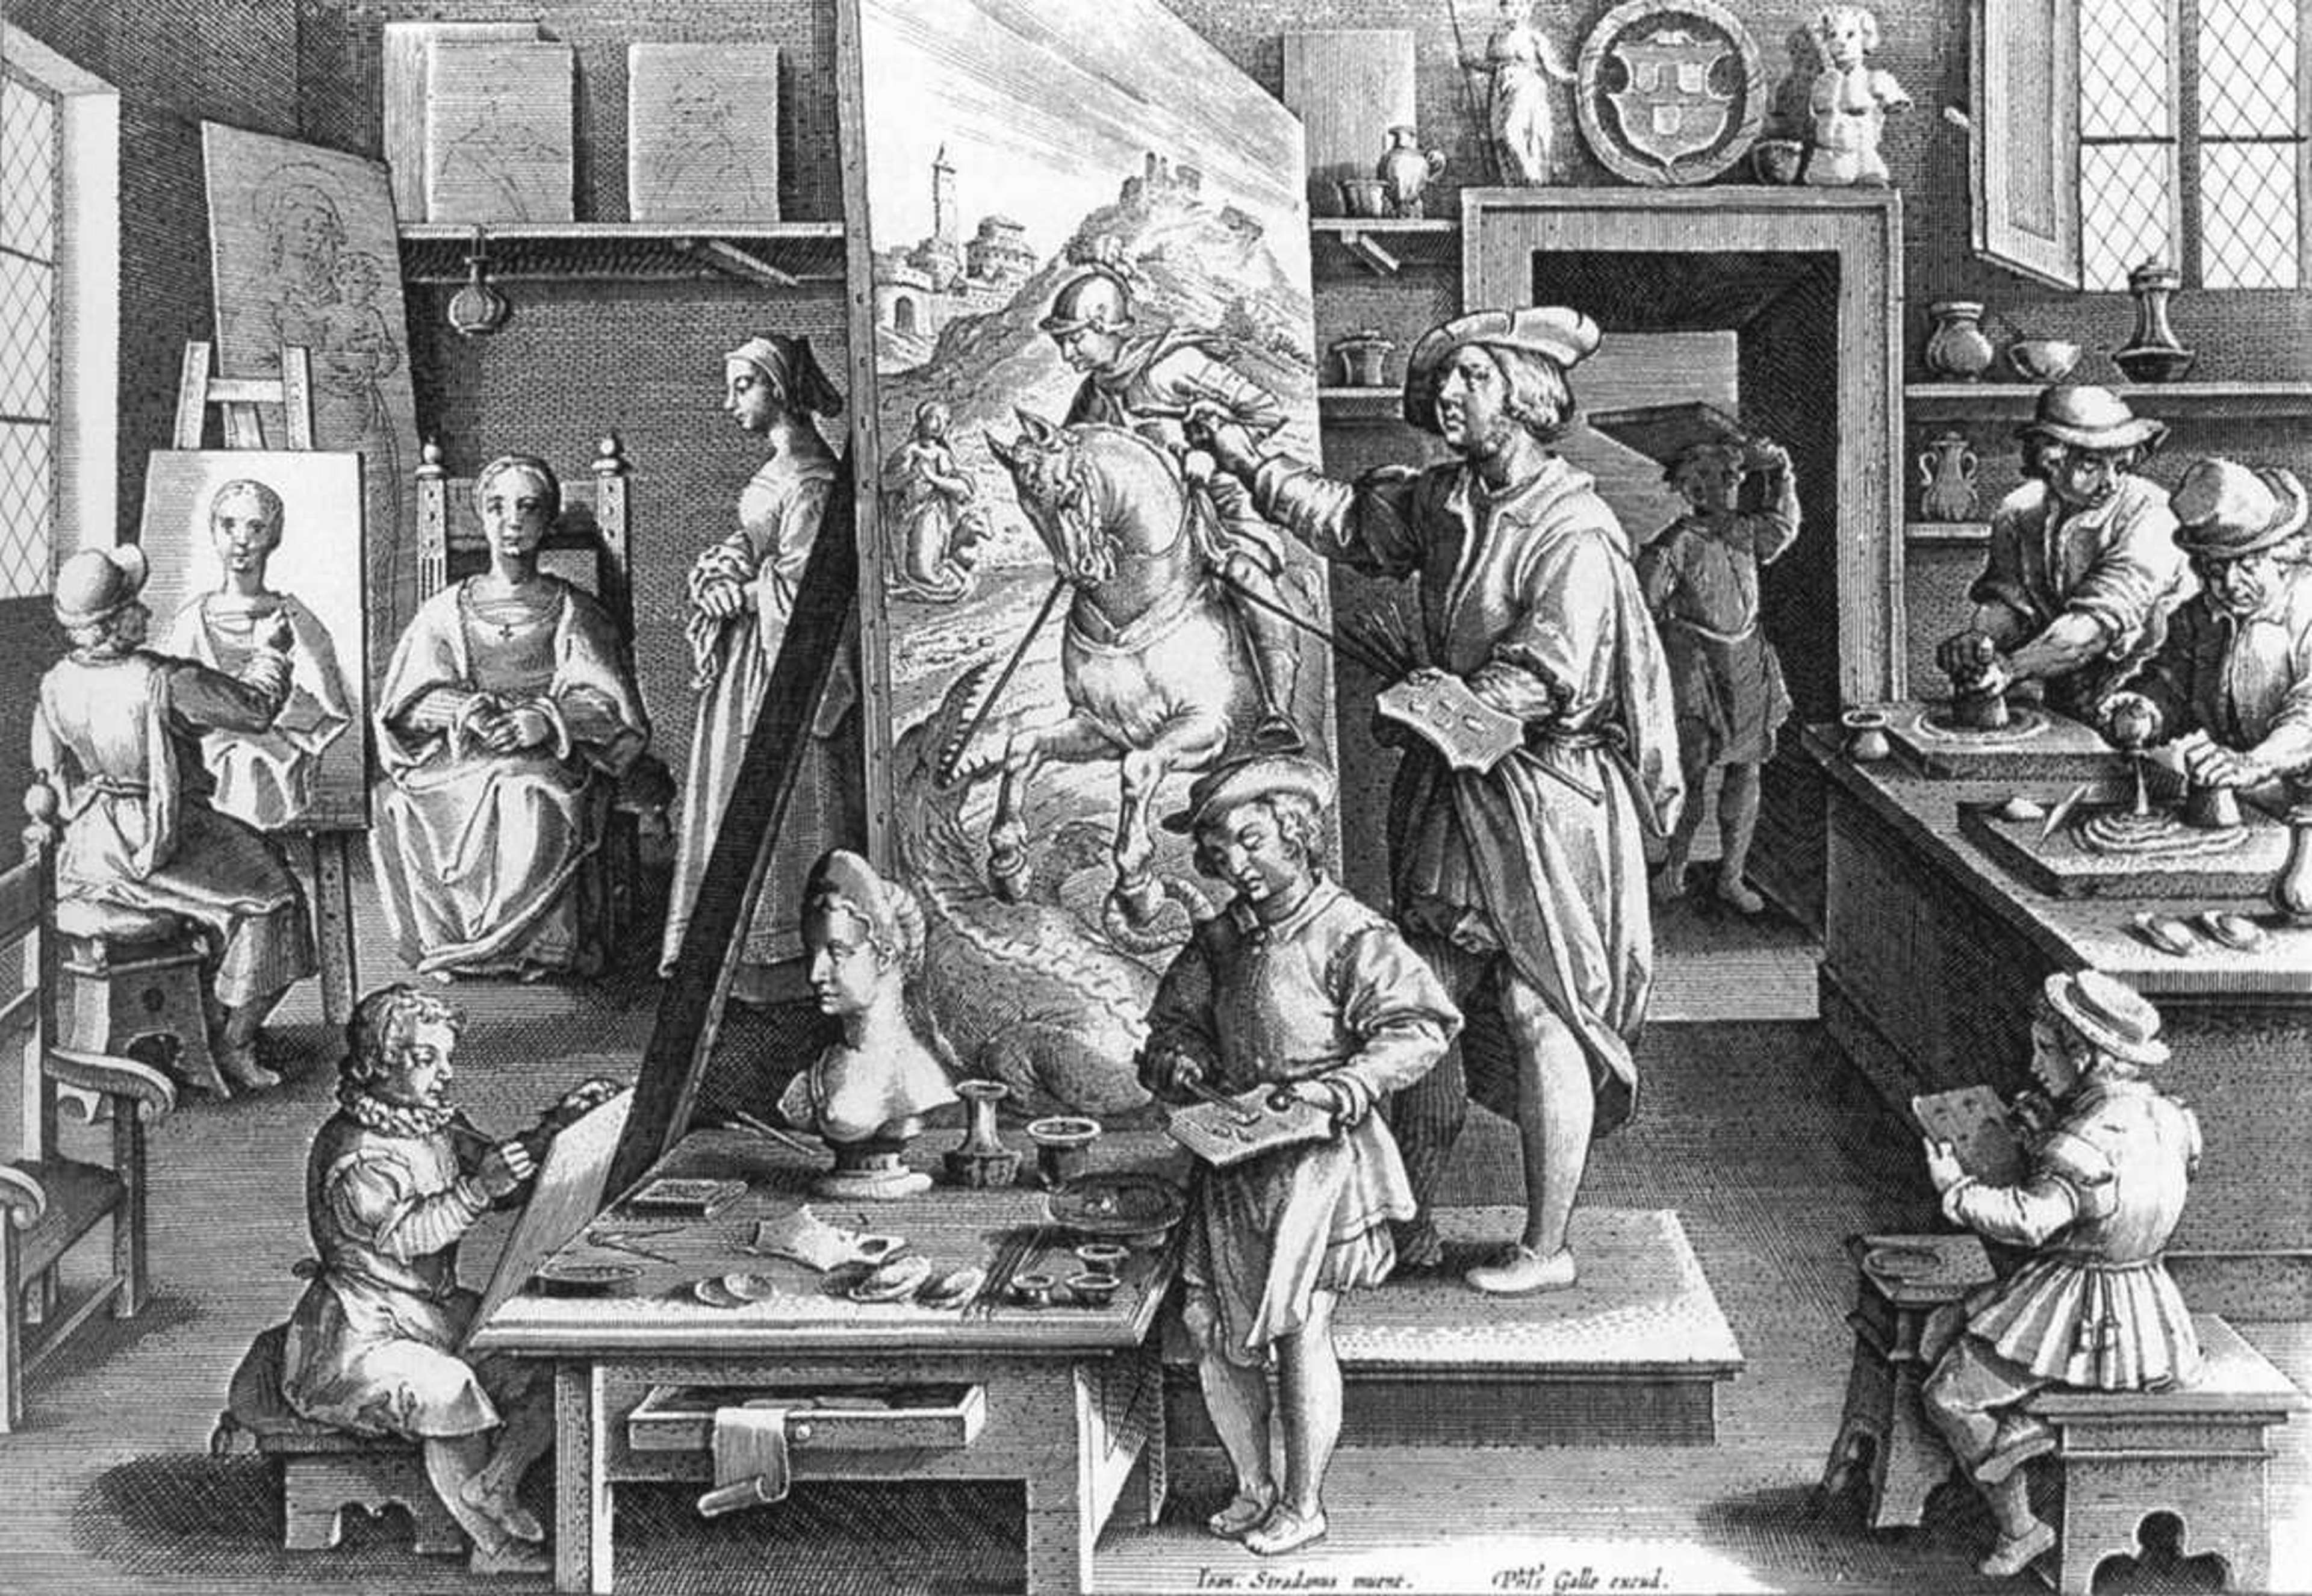 An image of a print showing A Painter’s Workshop, by artist Philips Galle. It shows several people engrossed in different aspects of the painting process, from stretching canvases to mixing pigments and painting itself.